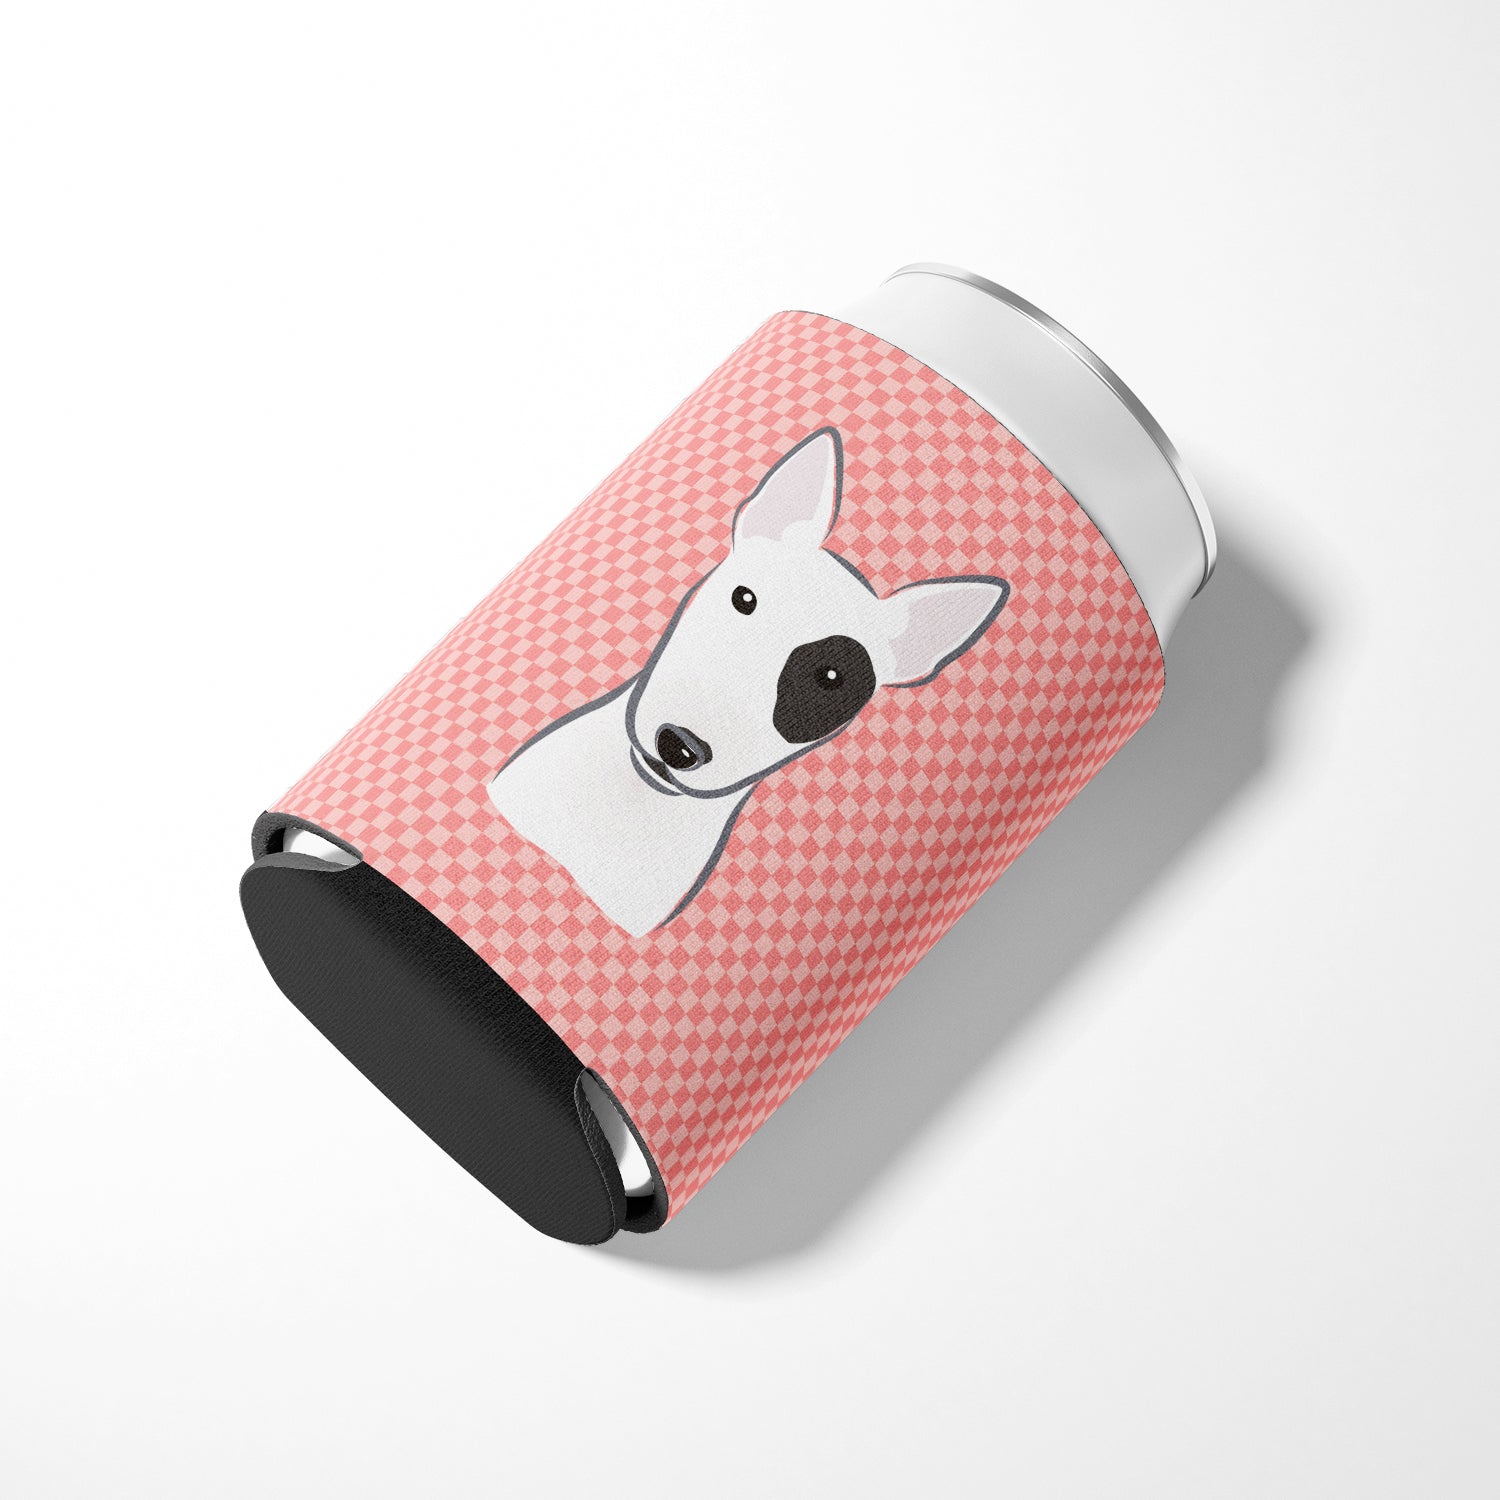 Checkerboard Pink Bull Terrier Can or Bottle Hugger BB1209CC.